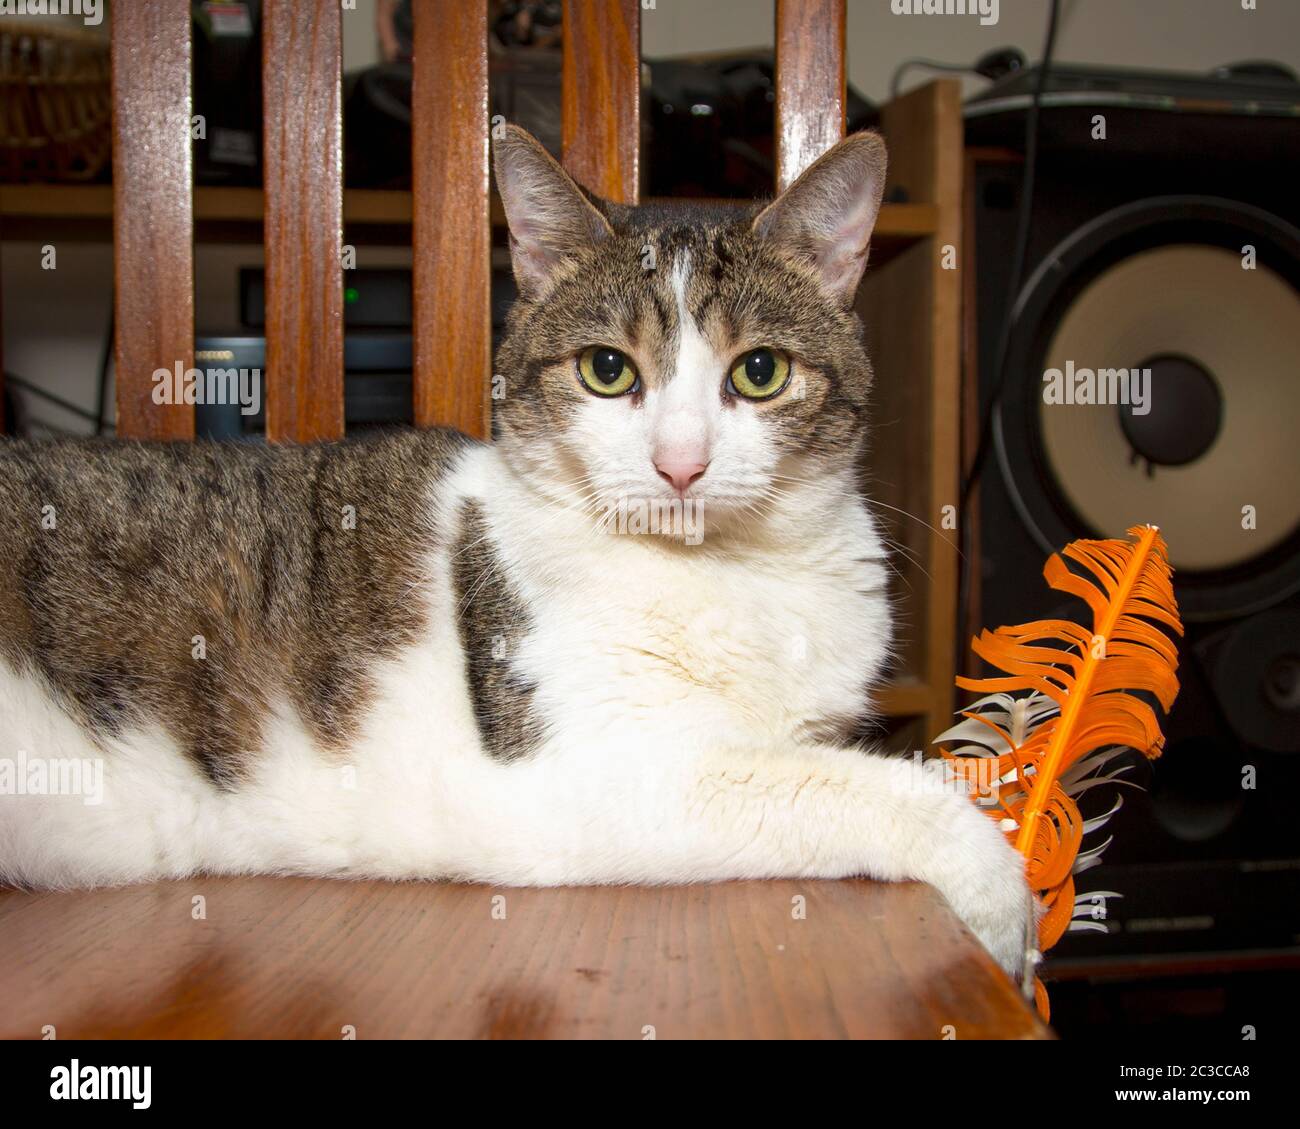 Portrait of a Grey and White Striped Cat Lounging on Chair Stock Photo